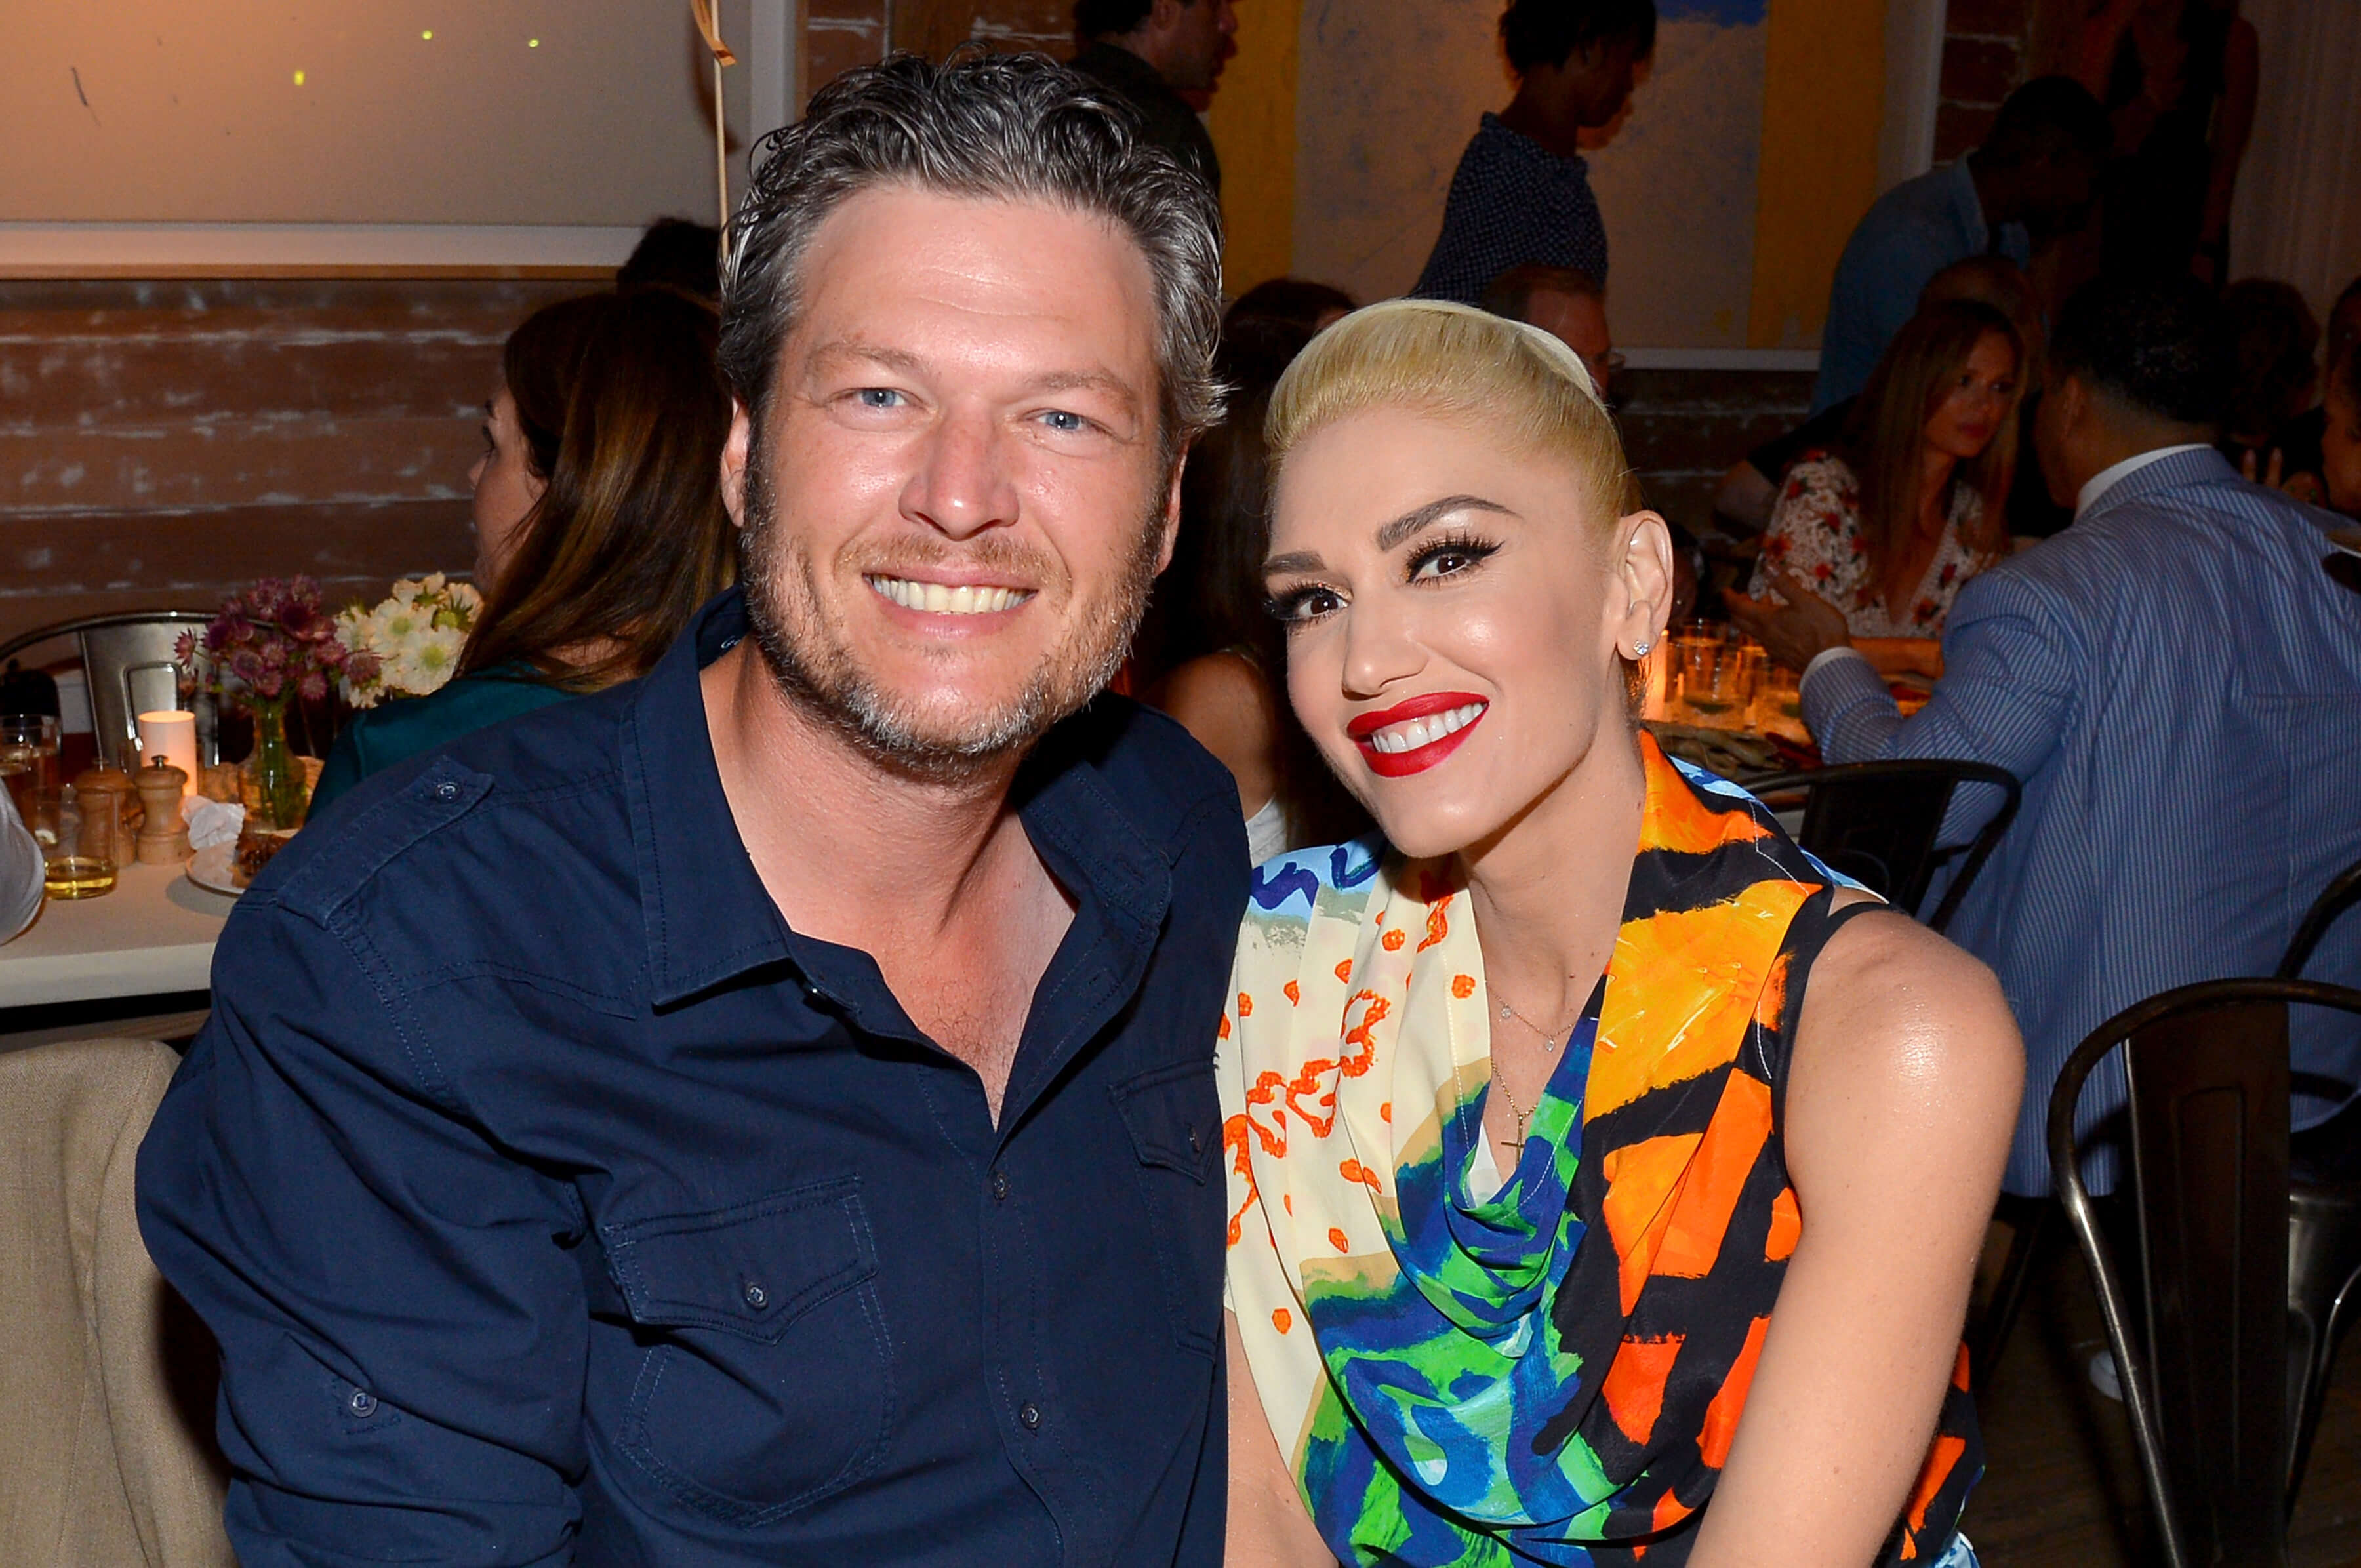 Blake Shelton and Gwen Stefani smiling while sitting next to each other at an event